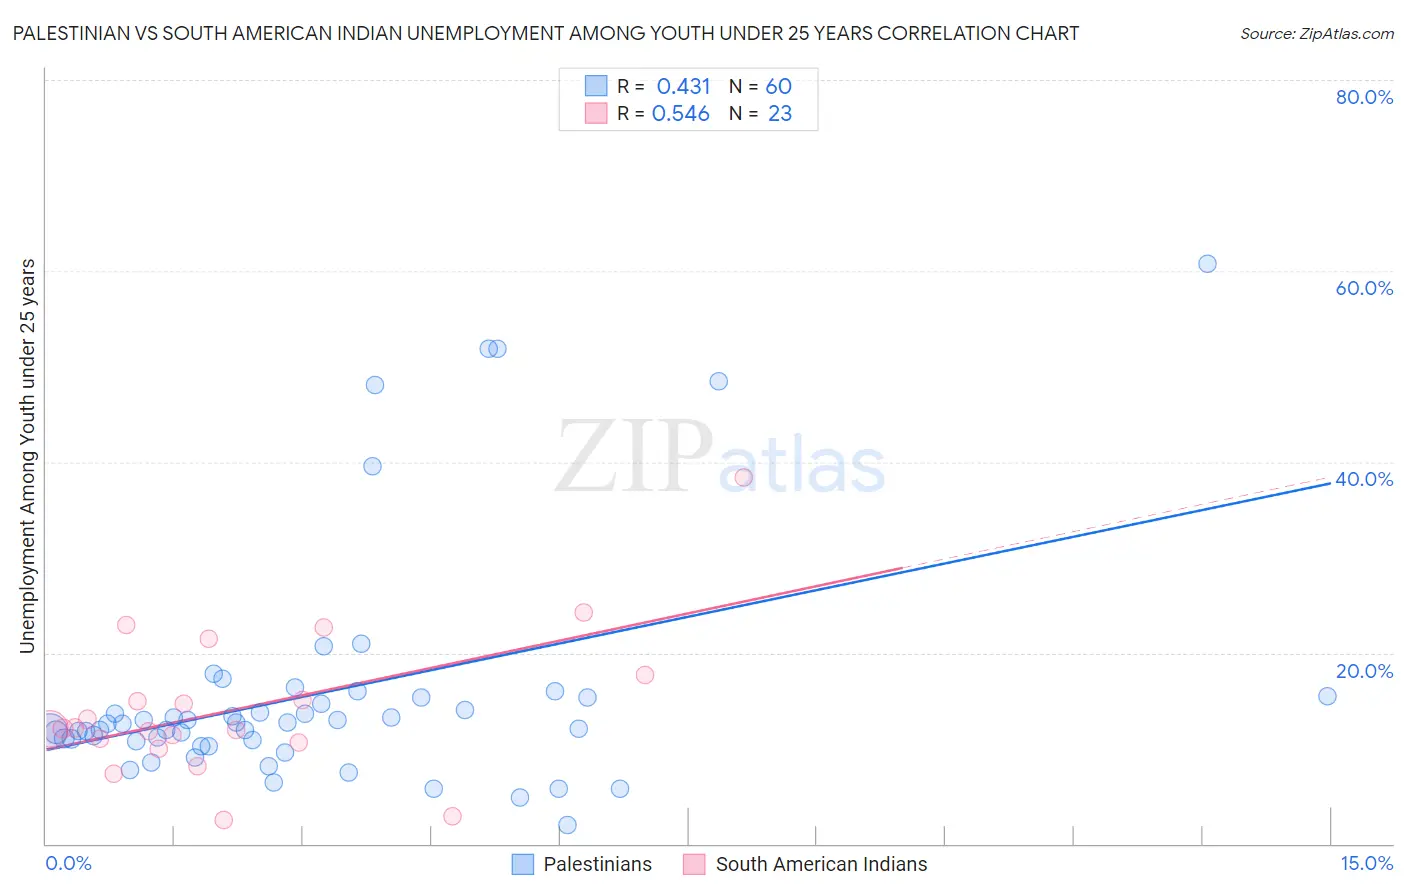 Palestinian vs South American Indian Unemployment Among Youth under 25 years